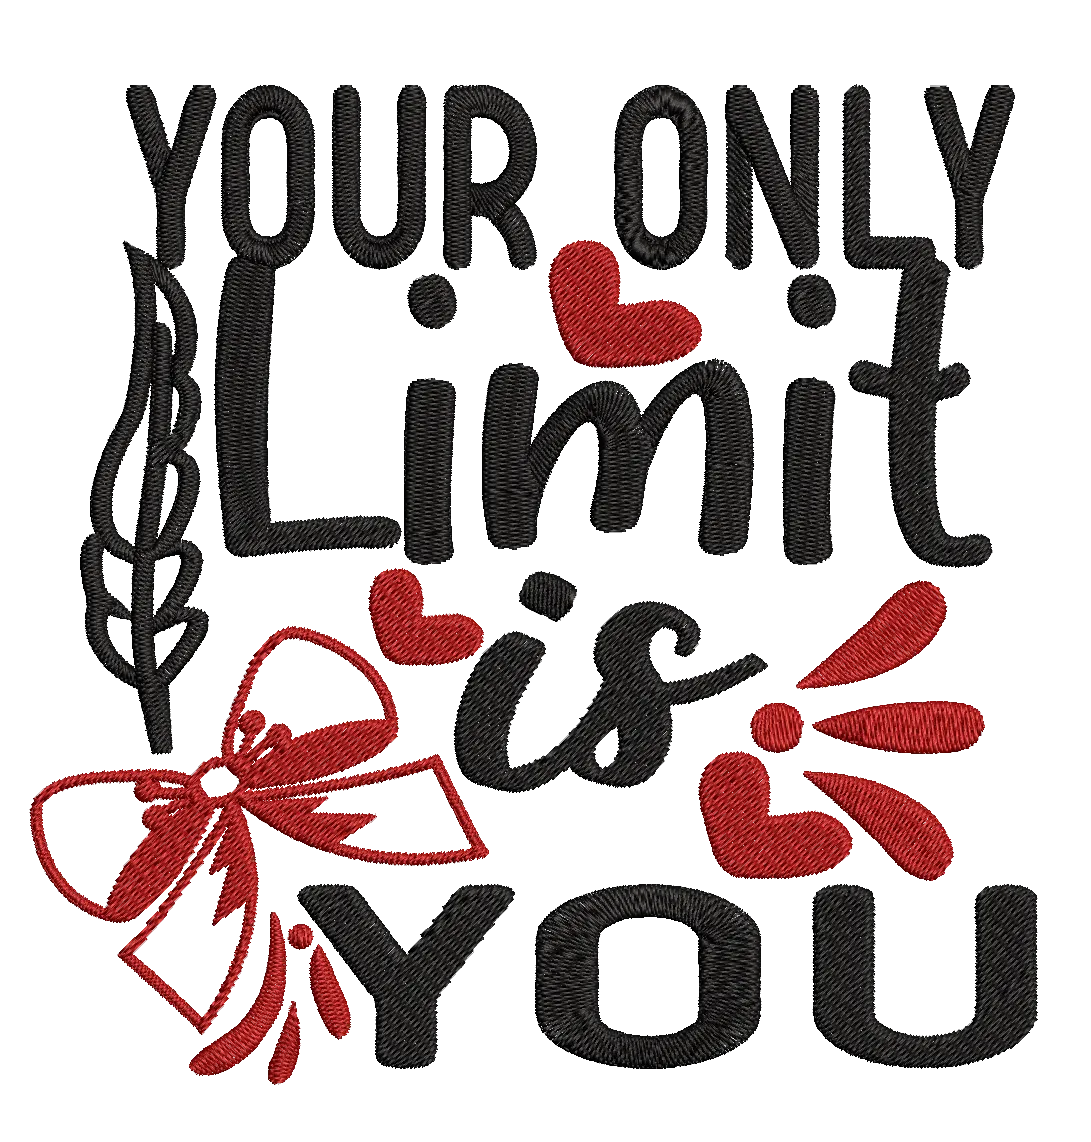 Quotes - Sublimation Bundle 2 - Pack of 20 Designs - Embroidery Designs FineryEmbroidery